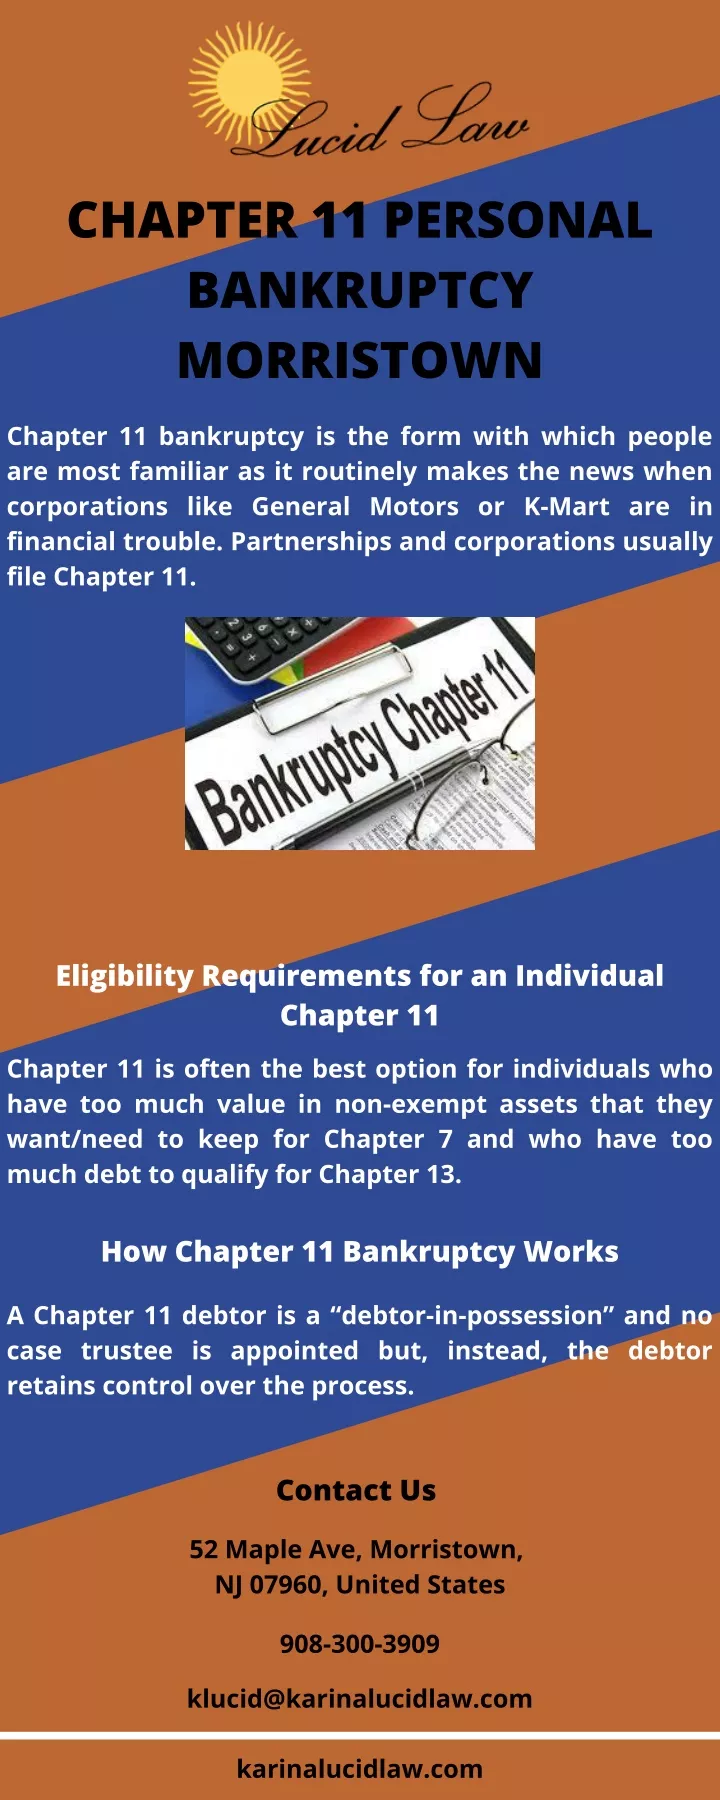 chapter 11 personal bankruptcy morristown